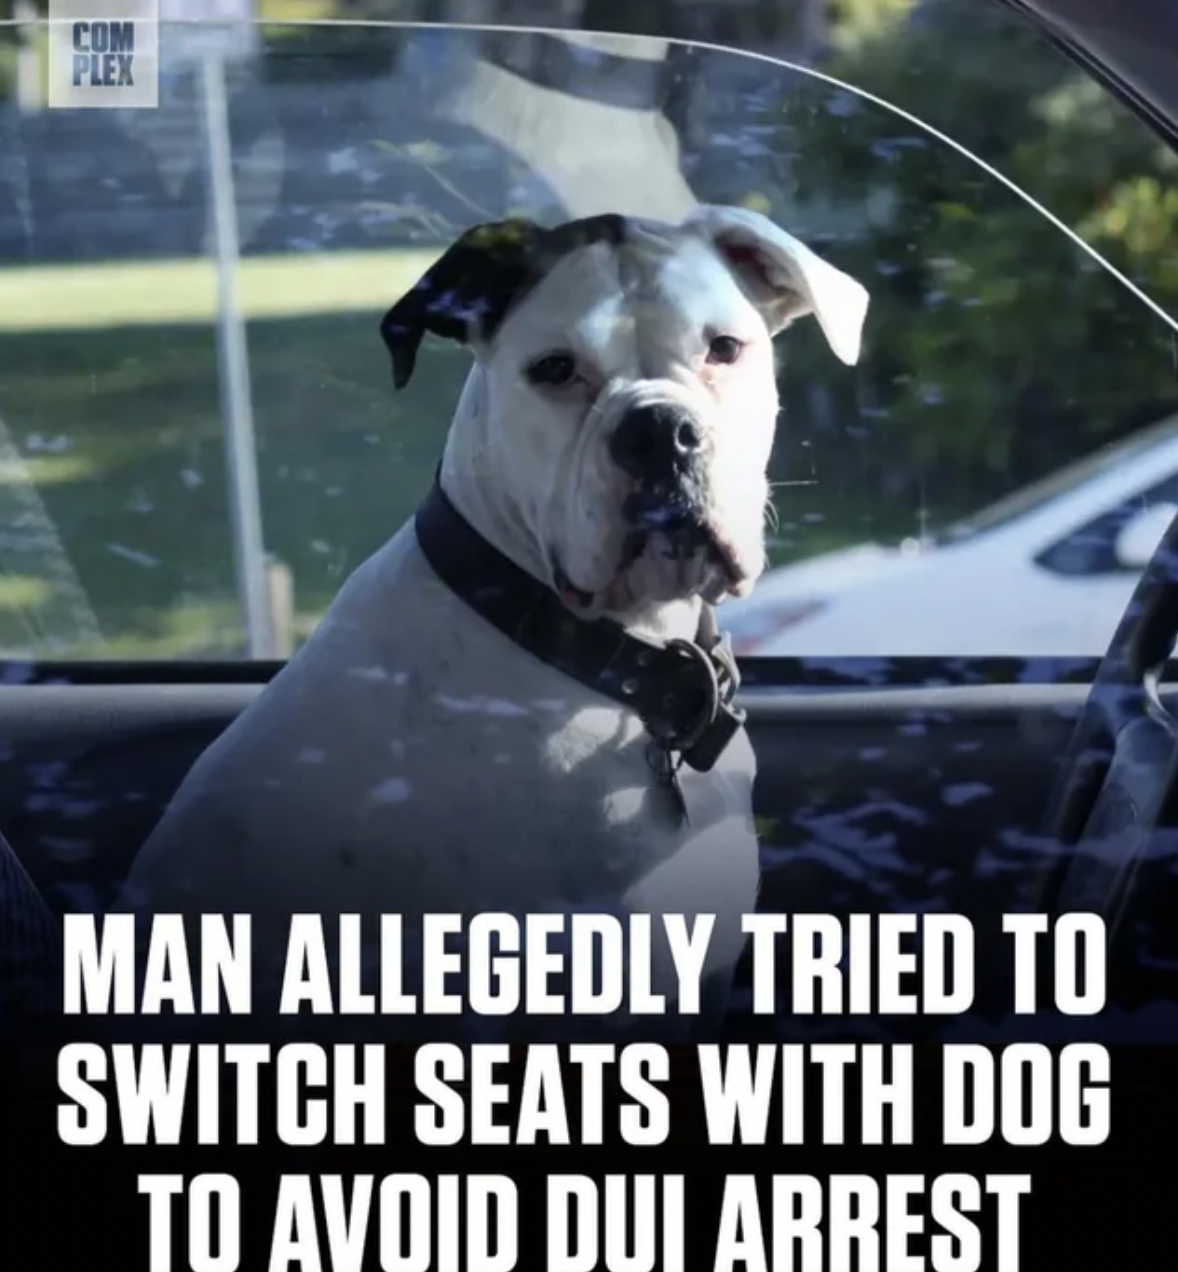 Facepalms - the cloth hall - Com Plex Man Allegedly Tried To Switch Seats With Dog To Avoid Dui Arrest